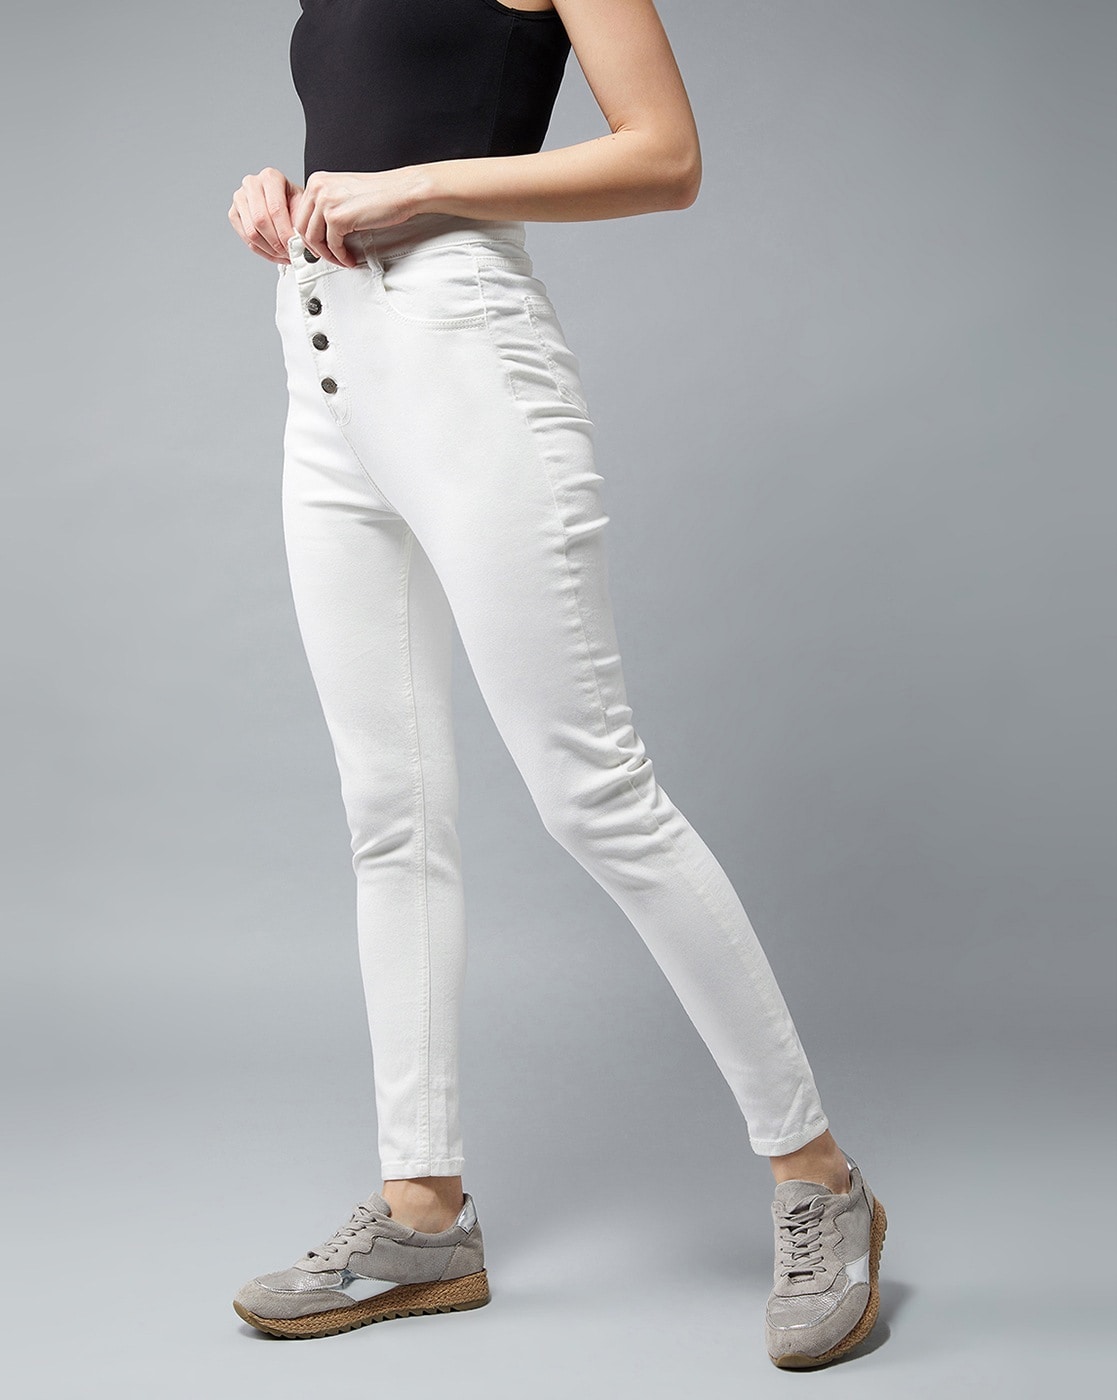 Buy White Skinny Fit Denim Deluxe Stretch Jeans Online at Muftijeans